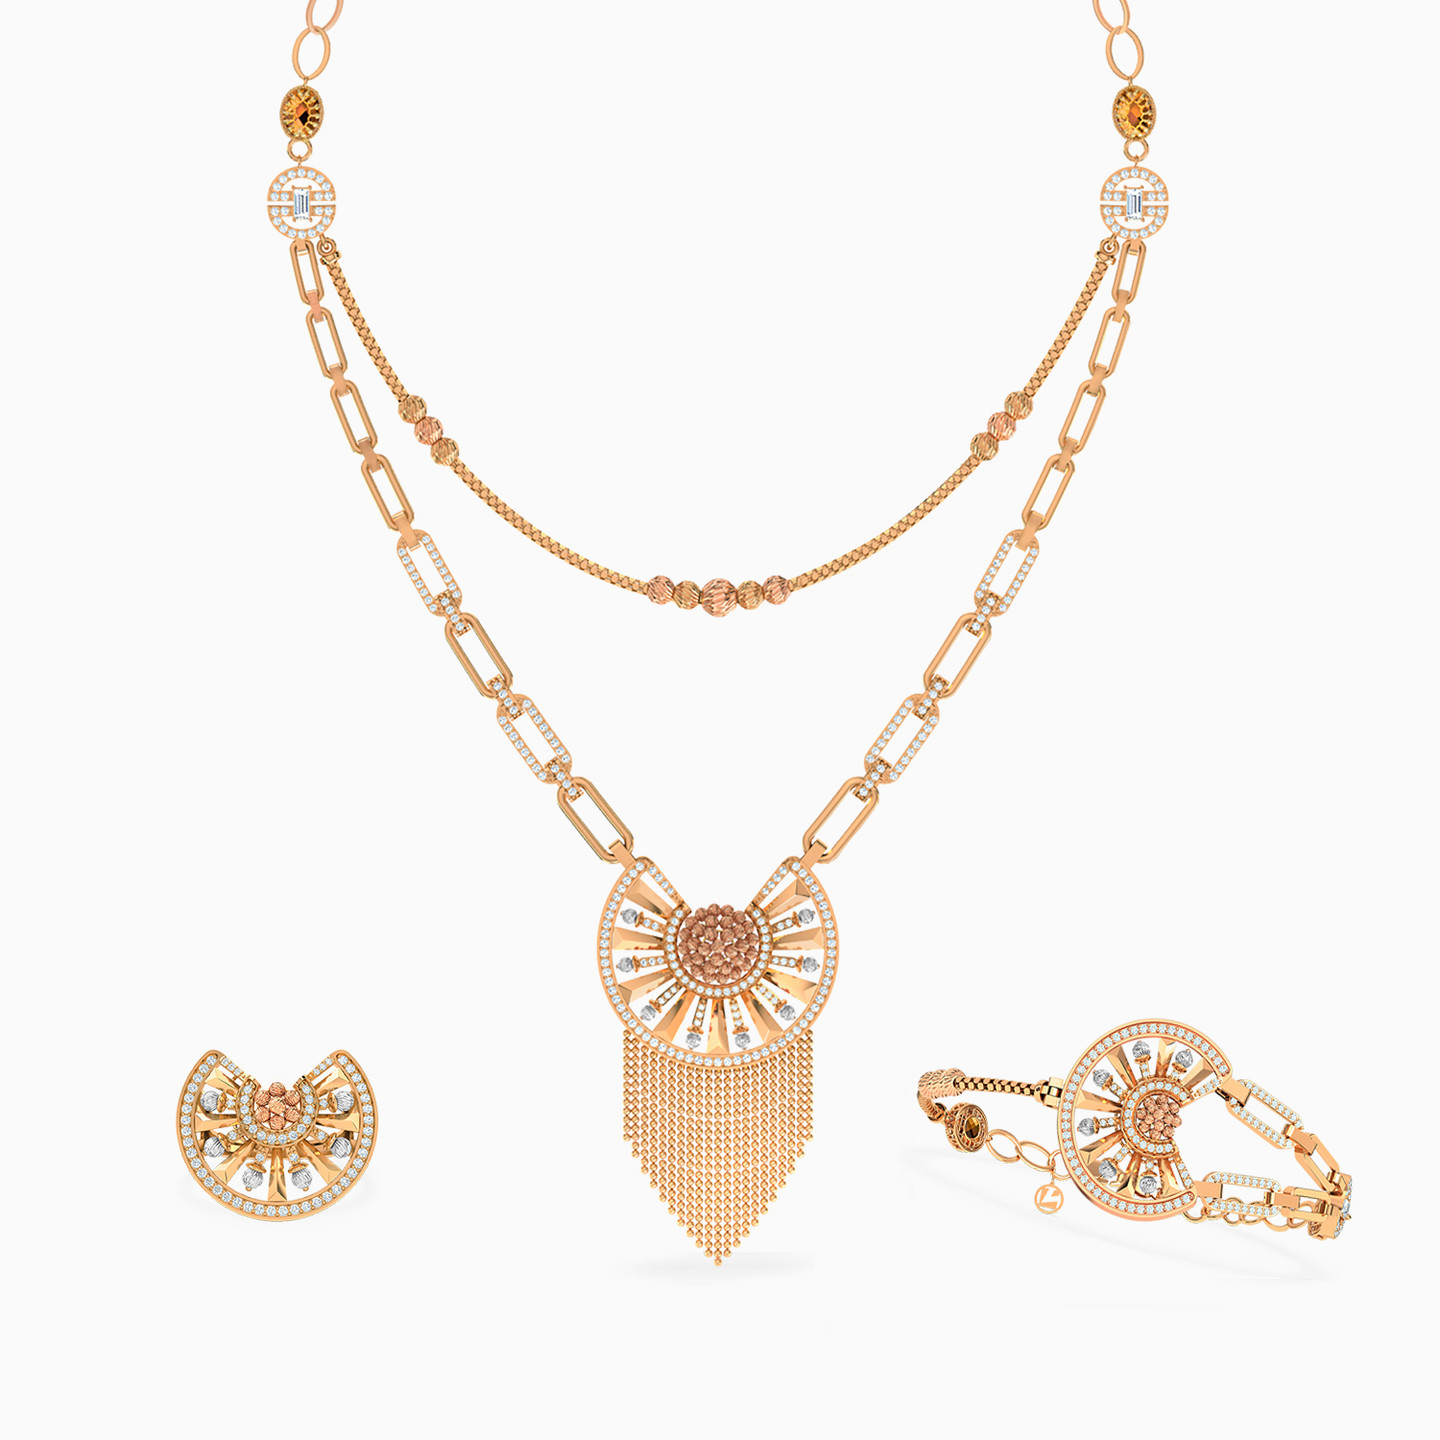 21K Gold Colored Stones Jewelry Set - 3 Pieces